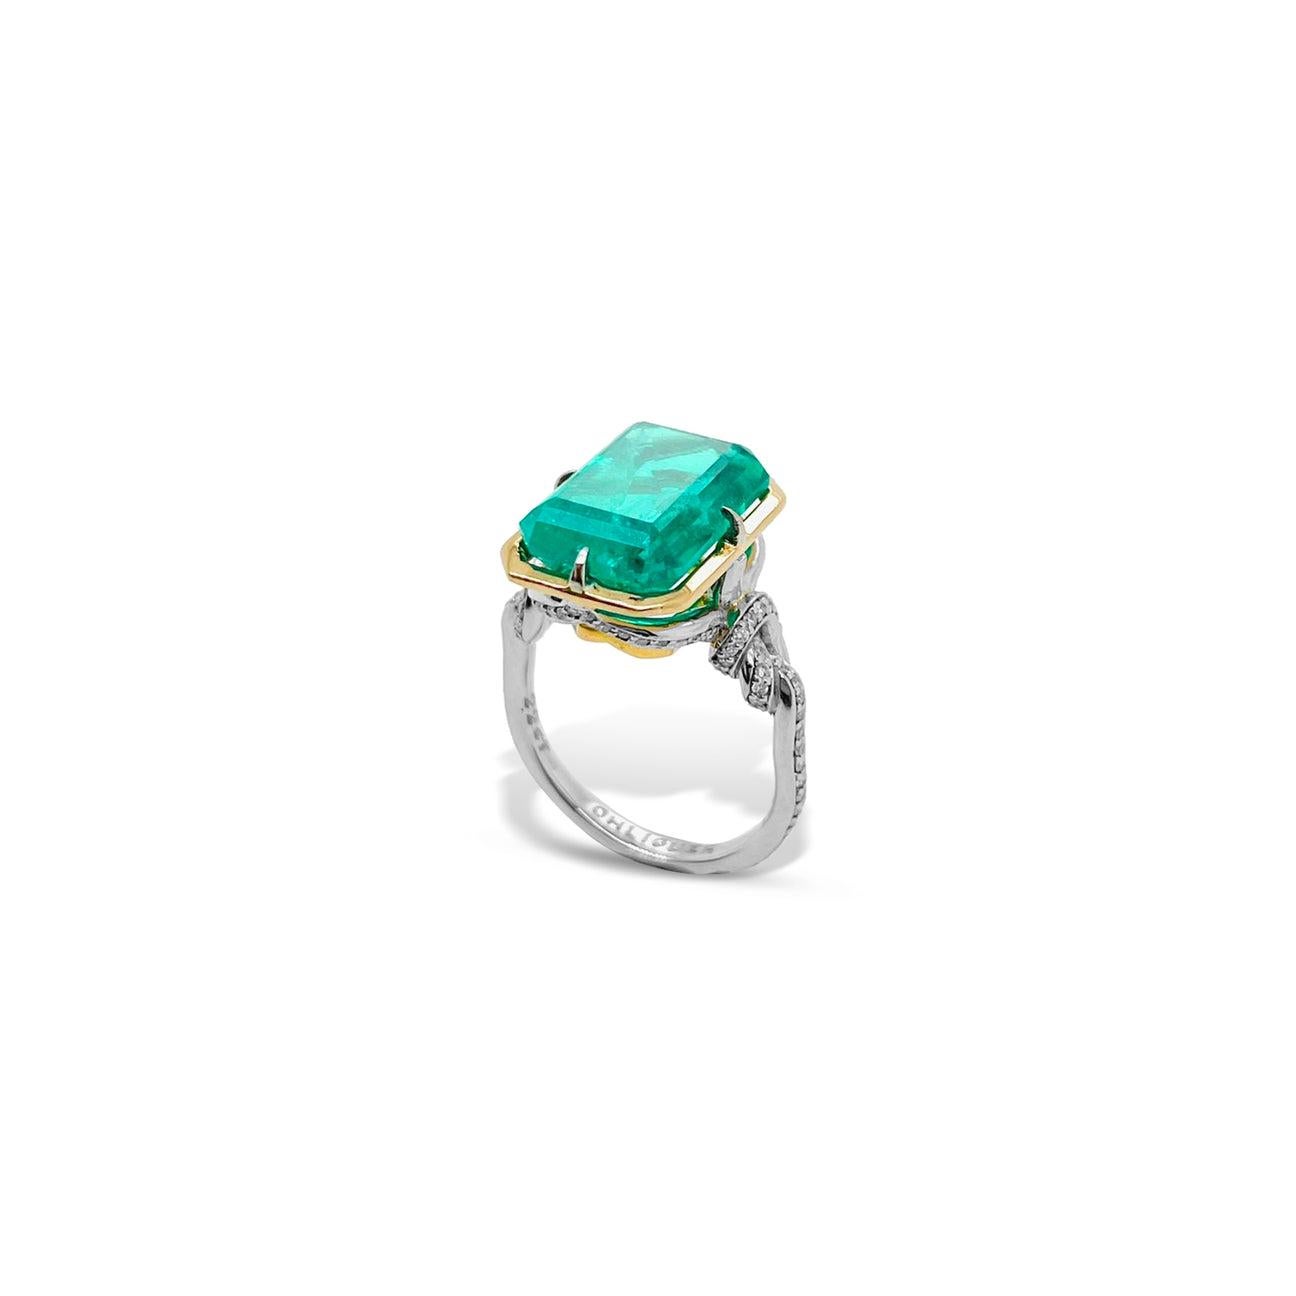 3ct Natural Emerald in Forget Me Knot Style Ring Platinum and 22ct Gold In New Condition For Sale In Brisbane, AU